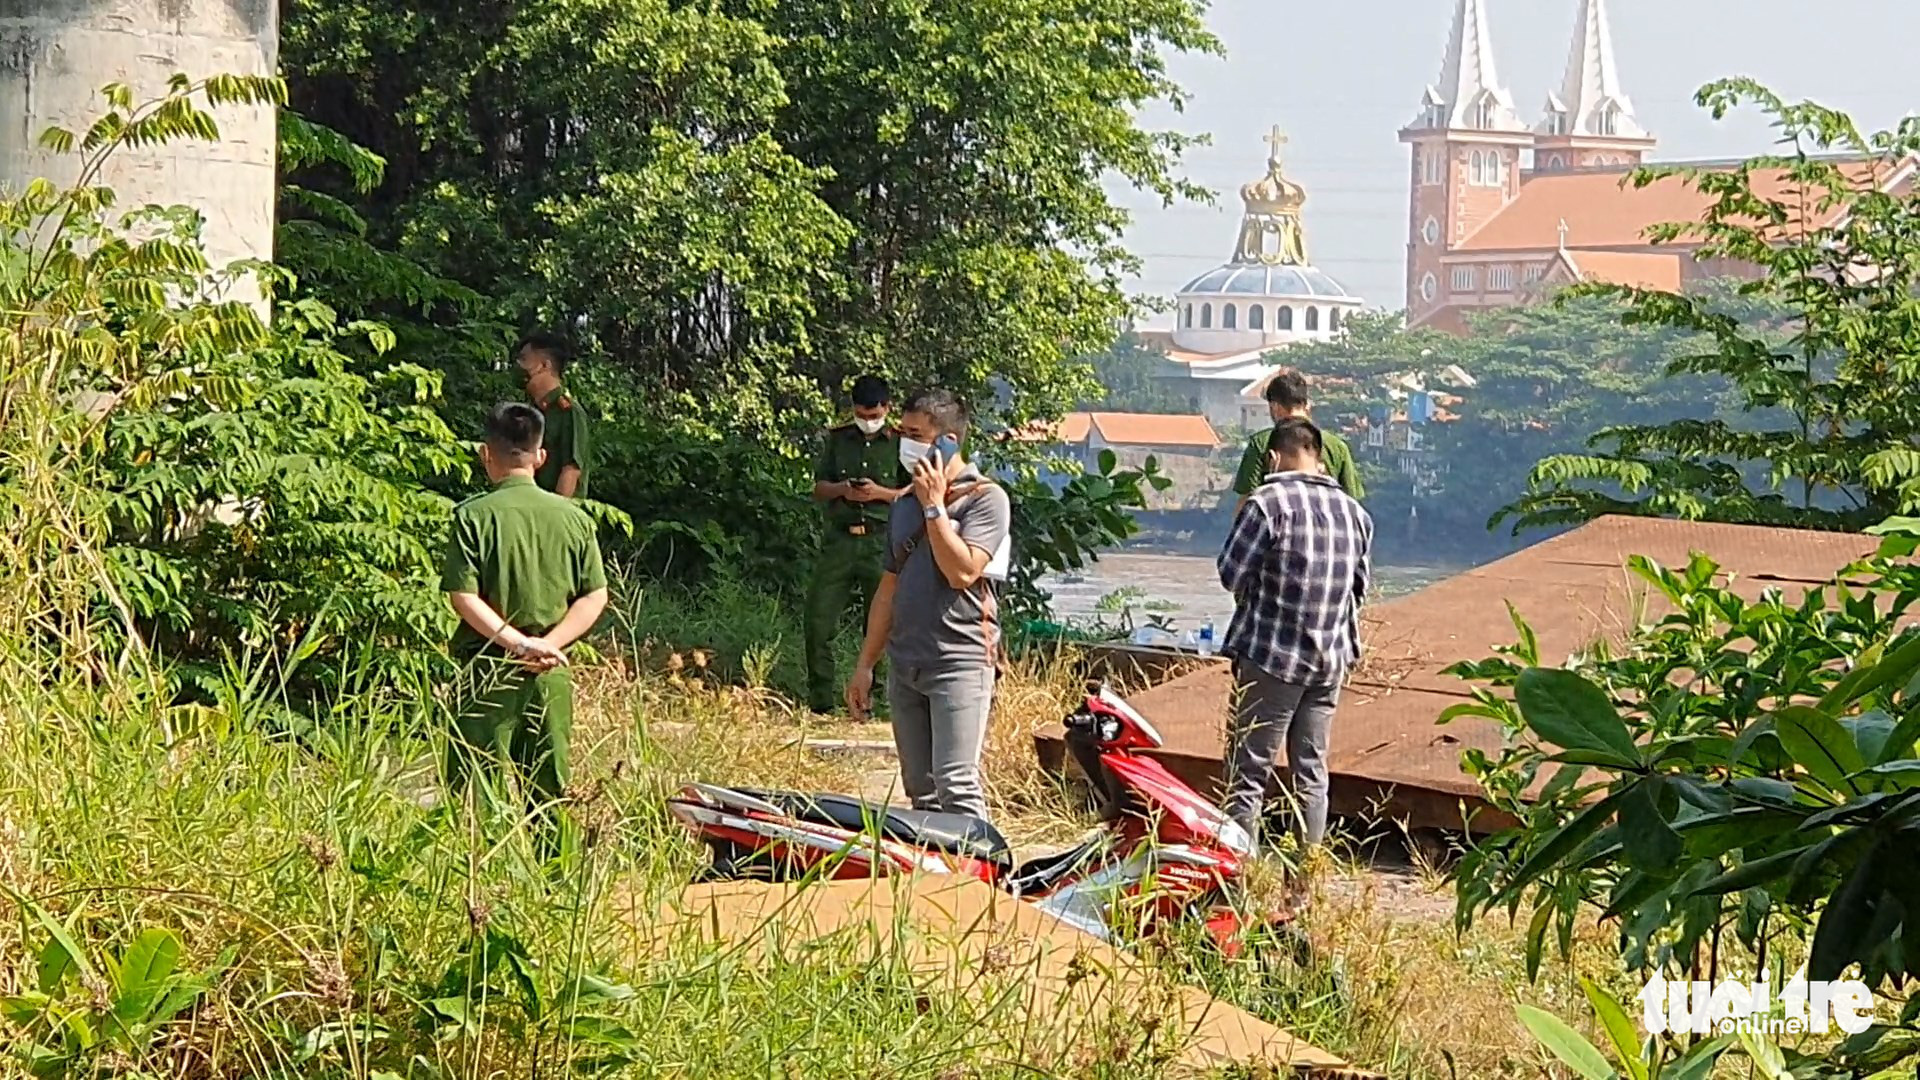 Freshman found dead in river after going missing for days in Ho Chi Minh City